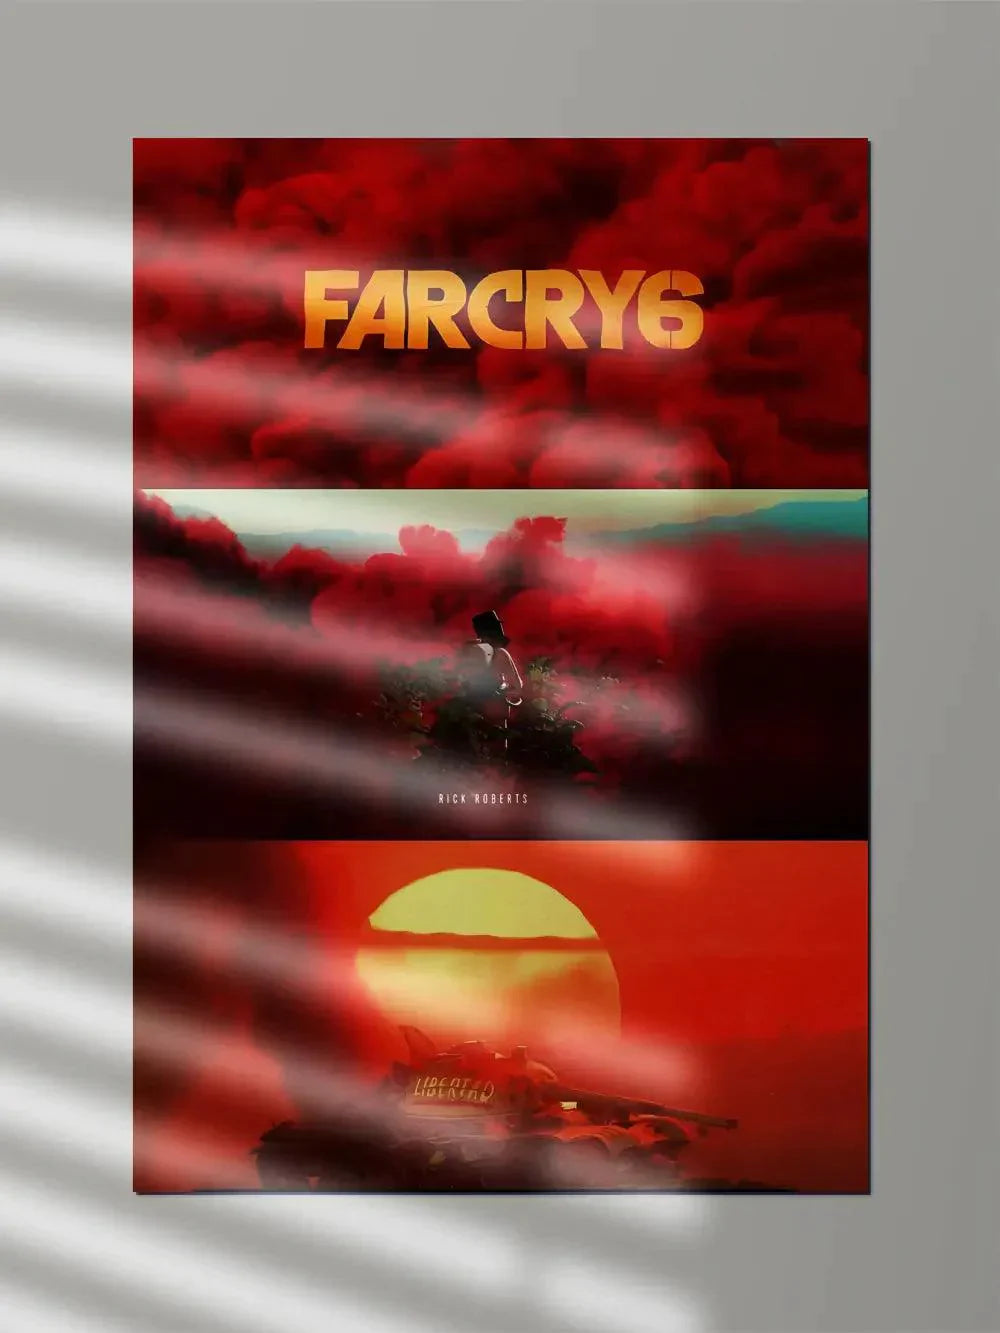 FAR CRY 6 Game Poster - Poster Wiz